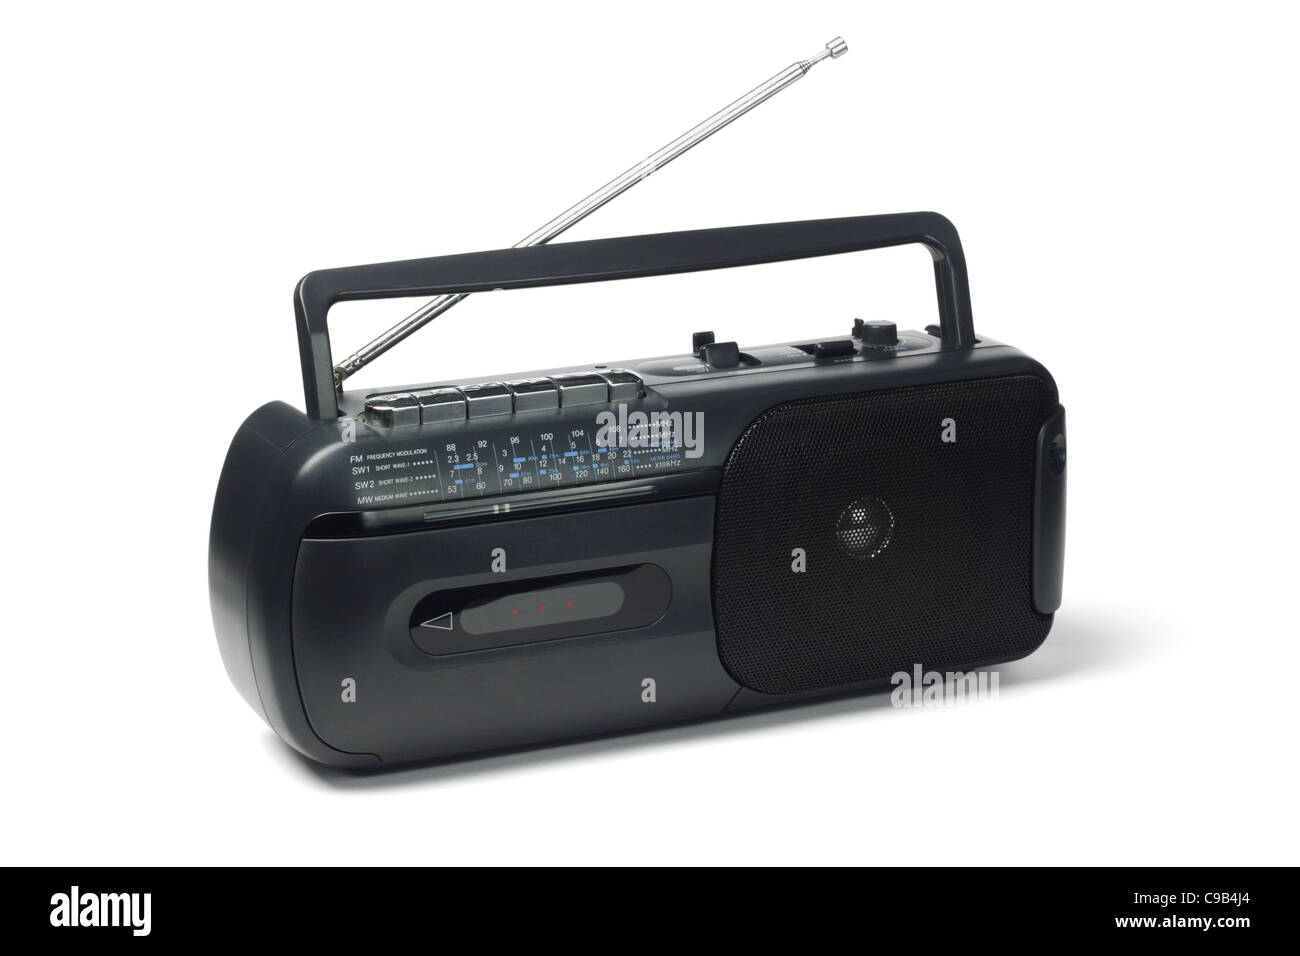 Radio cassette recorder and player on white background Stock Photo